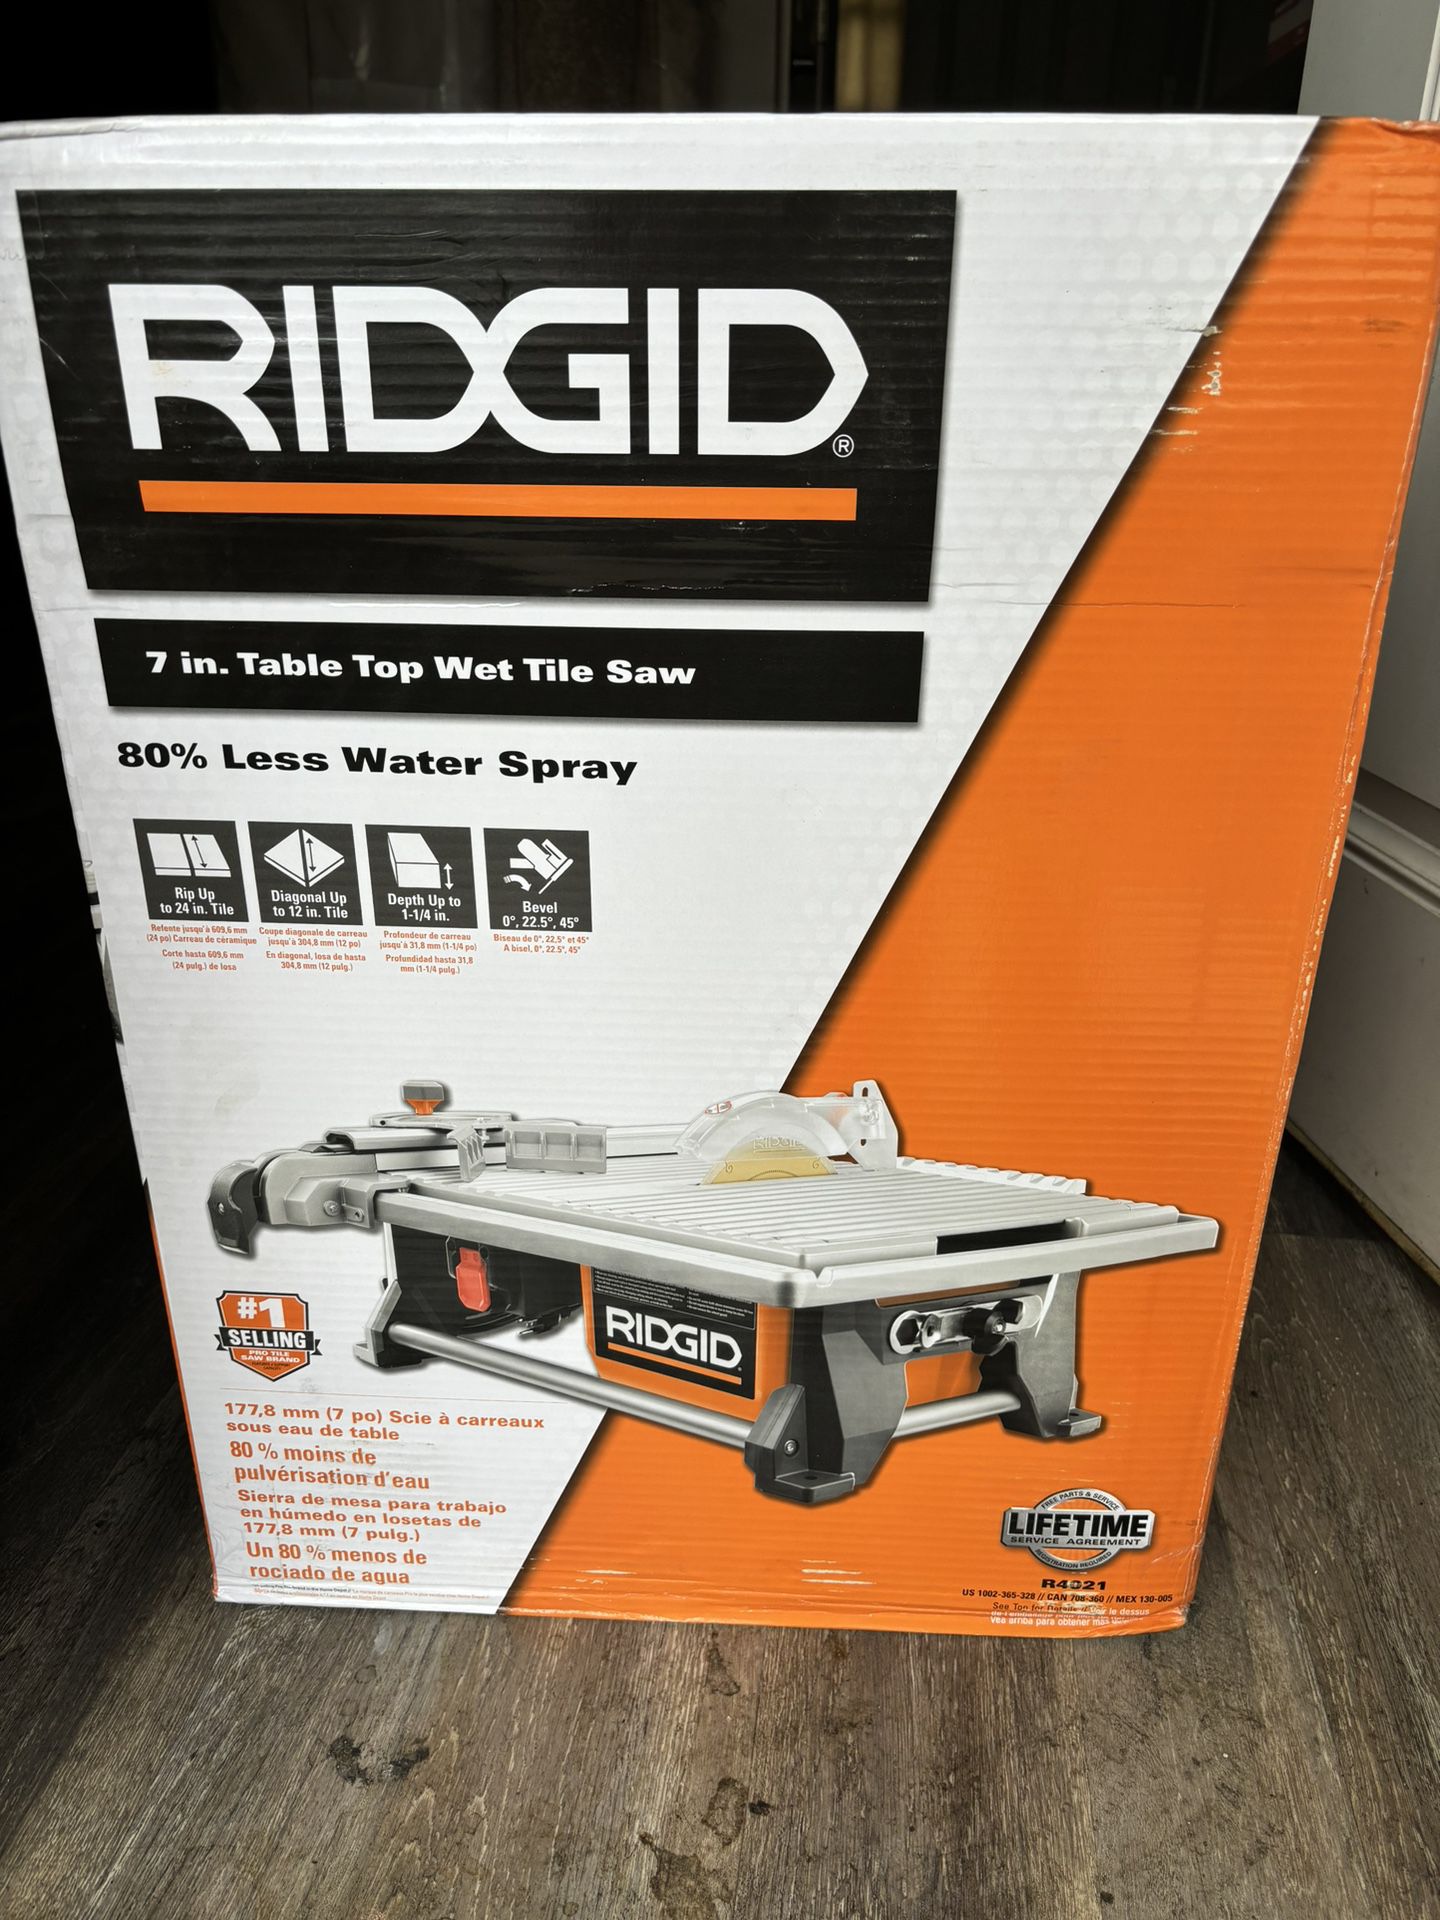 RIGID 7 In. Durable Professional Table Top Wet Tile Saw